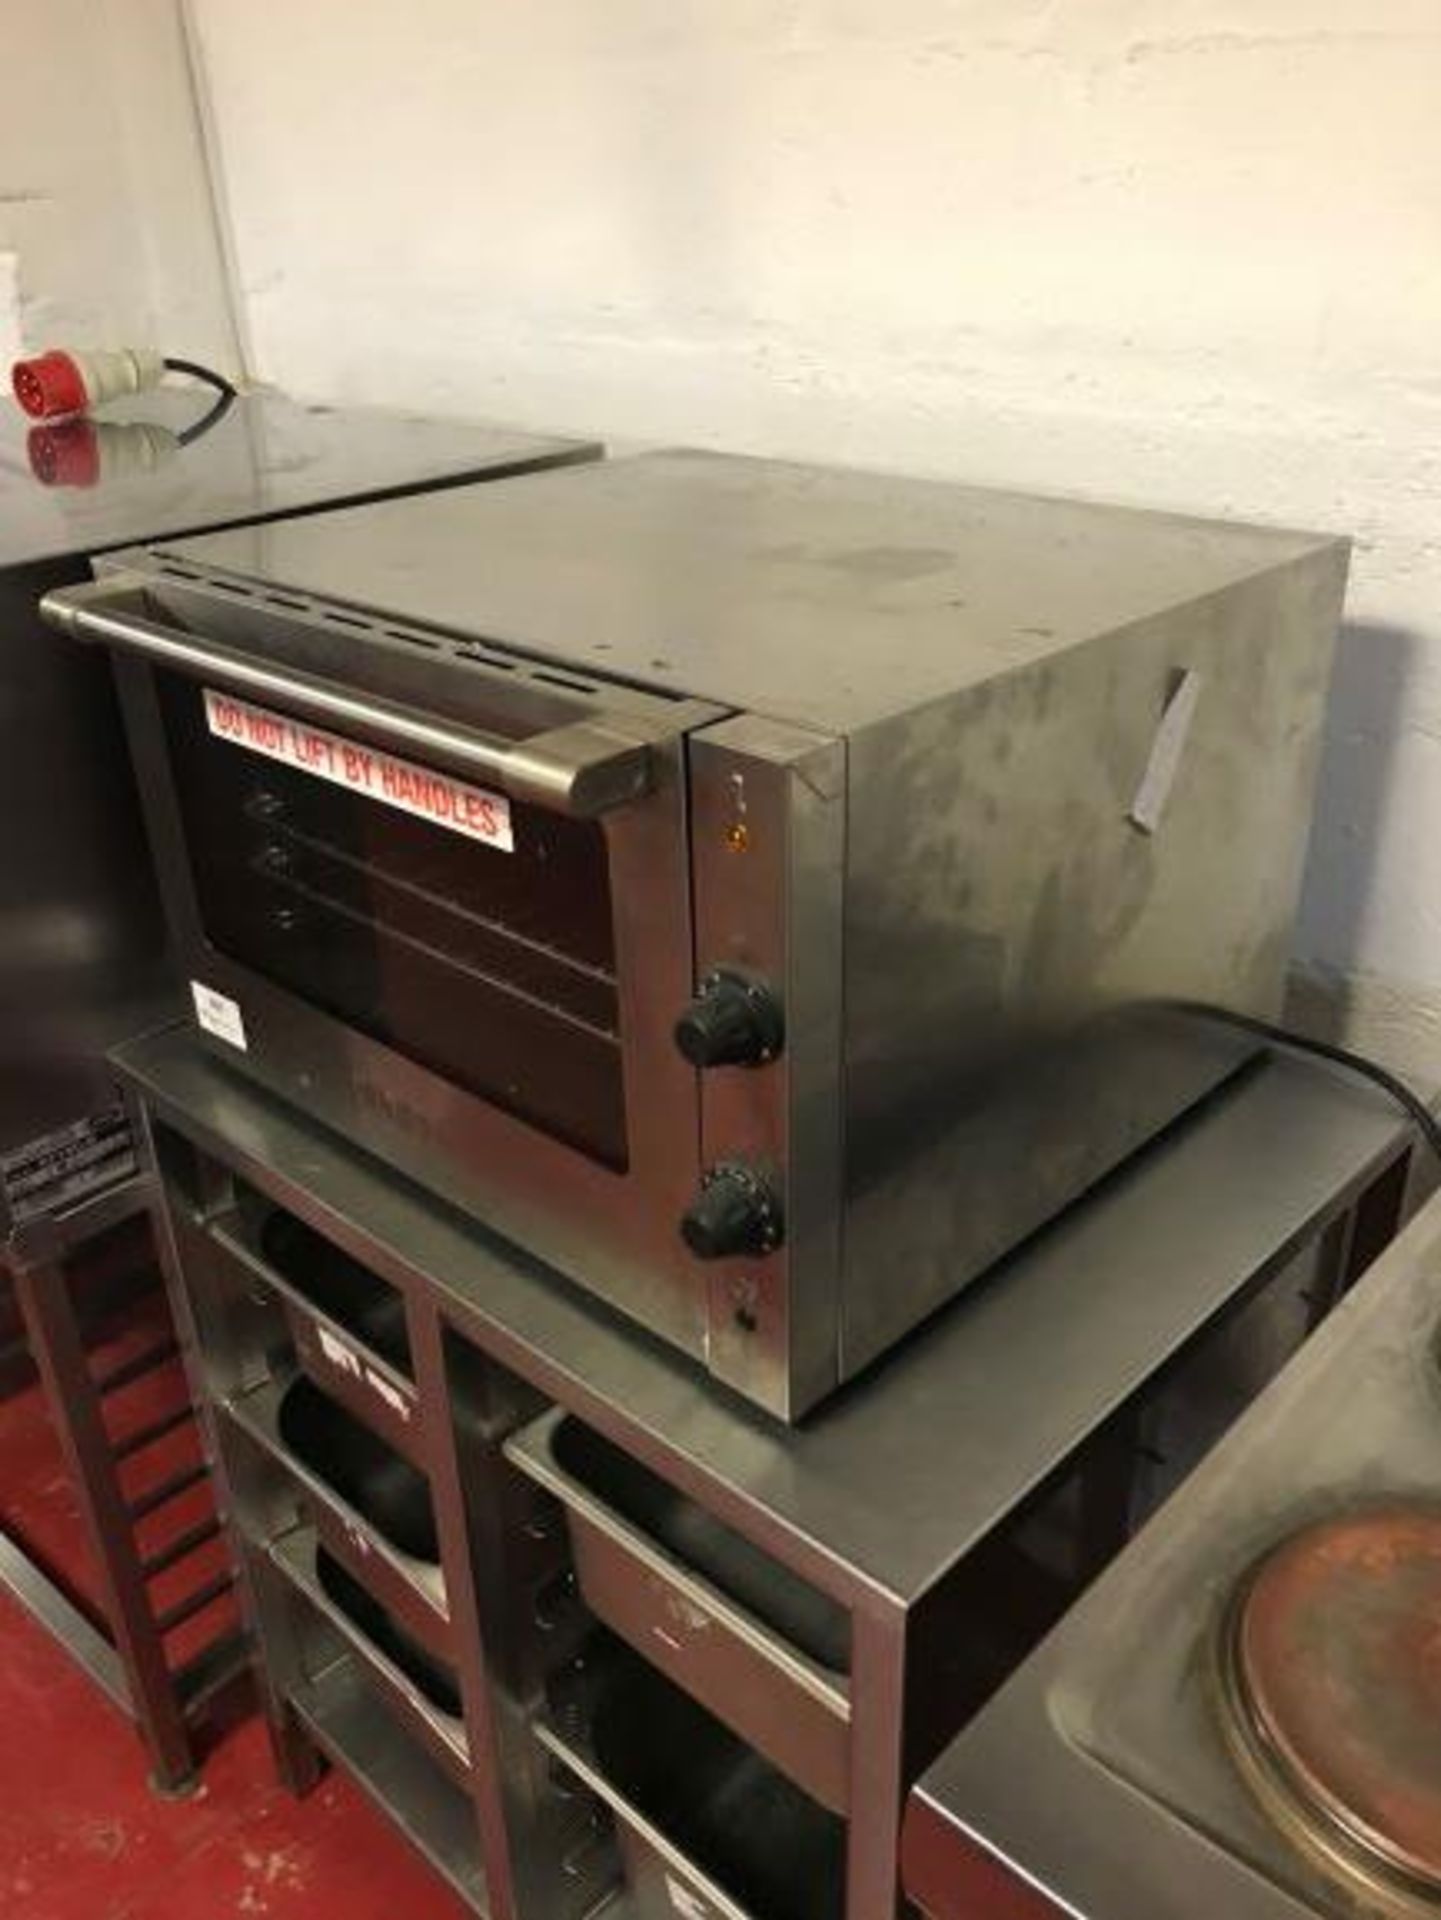 Burco BC CTC002 stainless steel countertop convection oven - Image 4 of 4